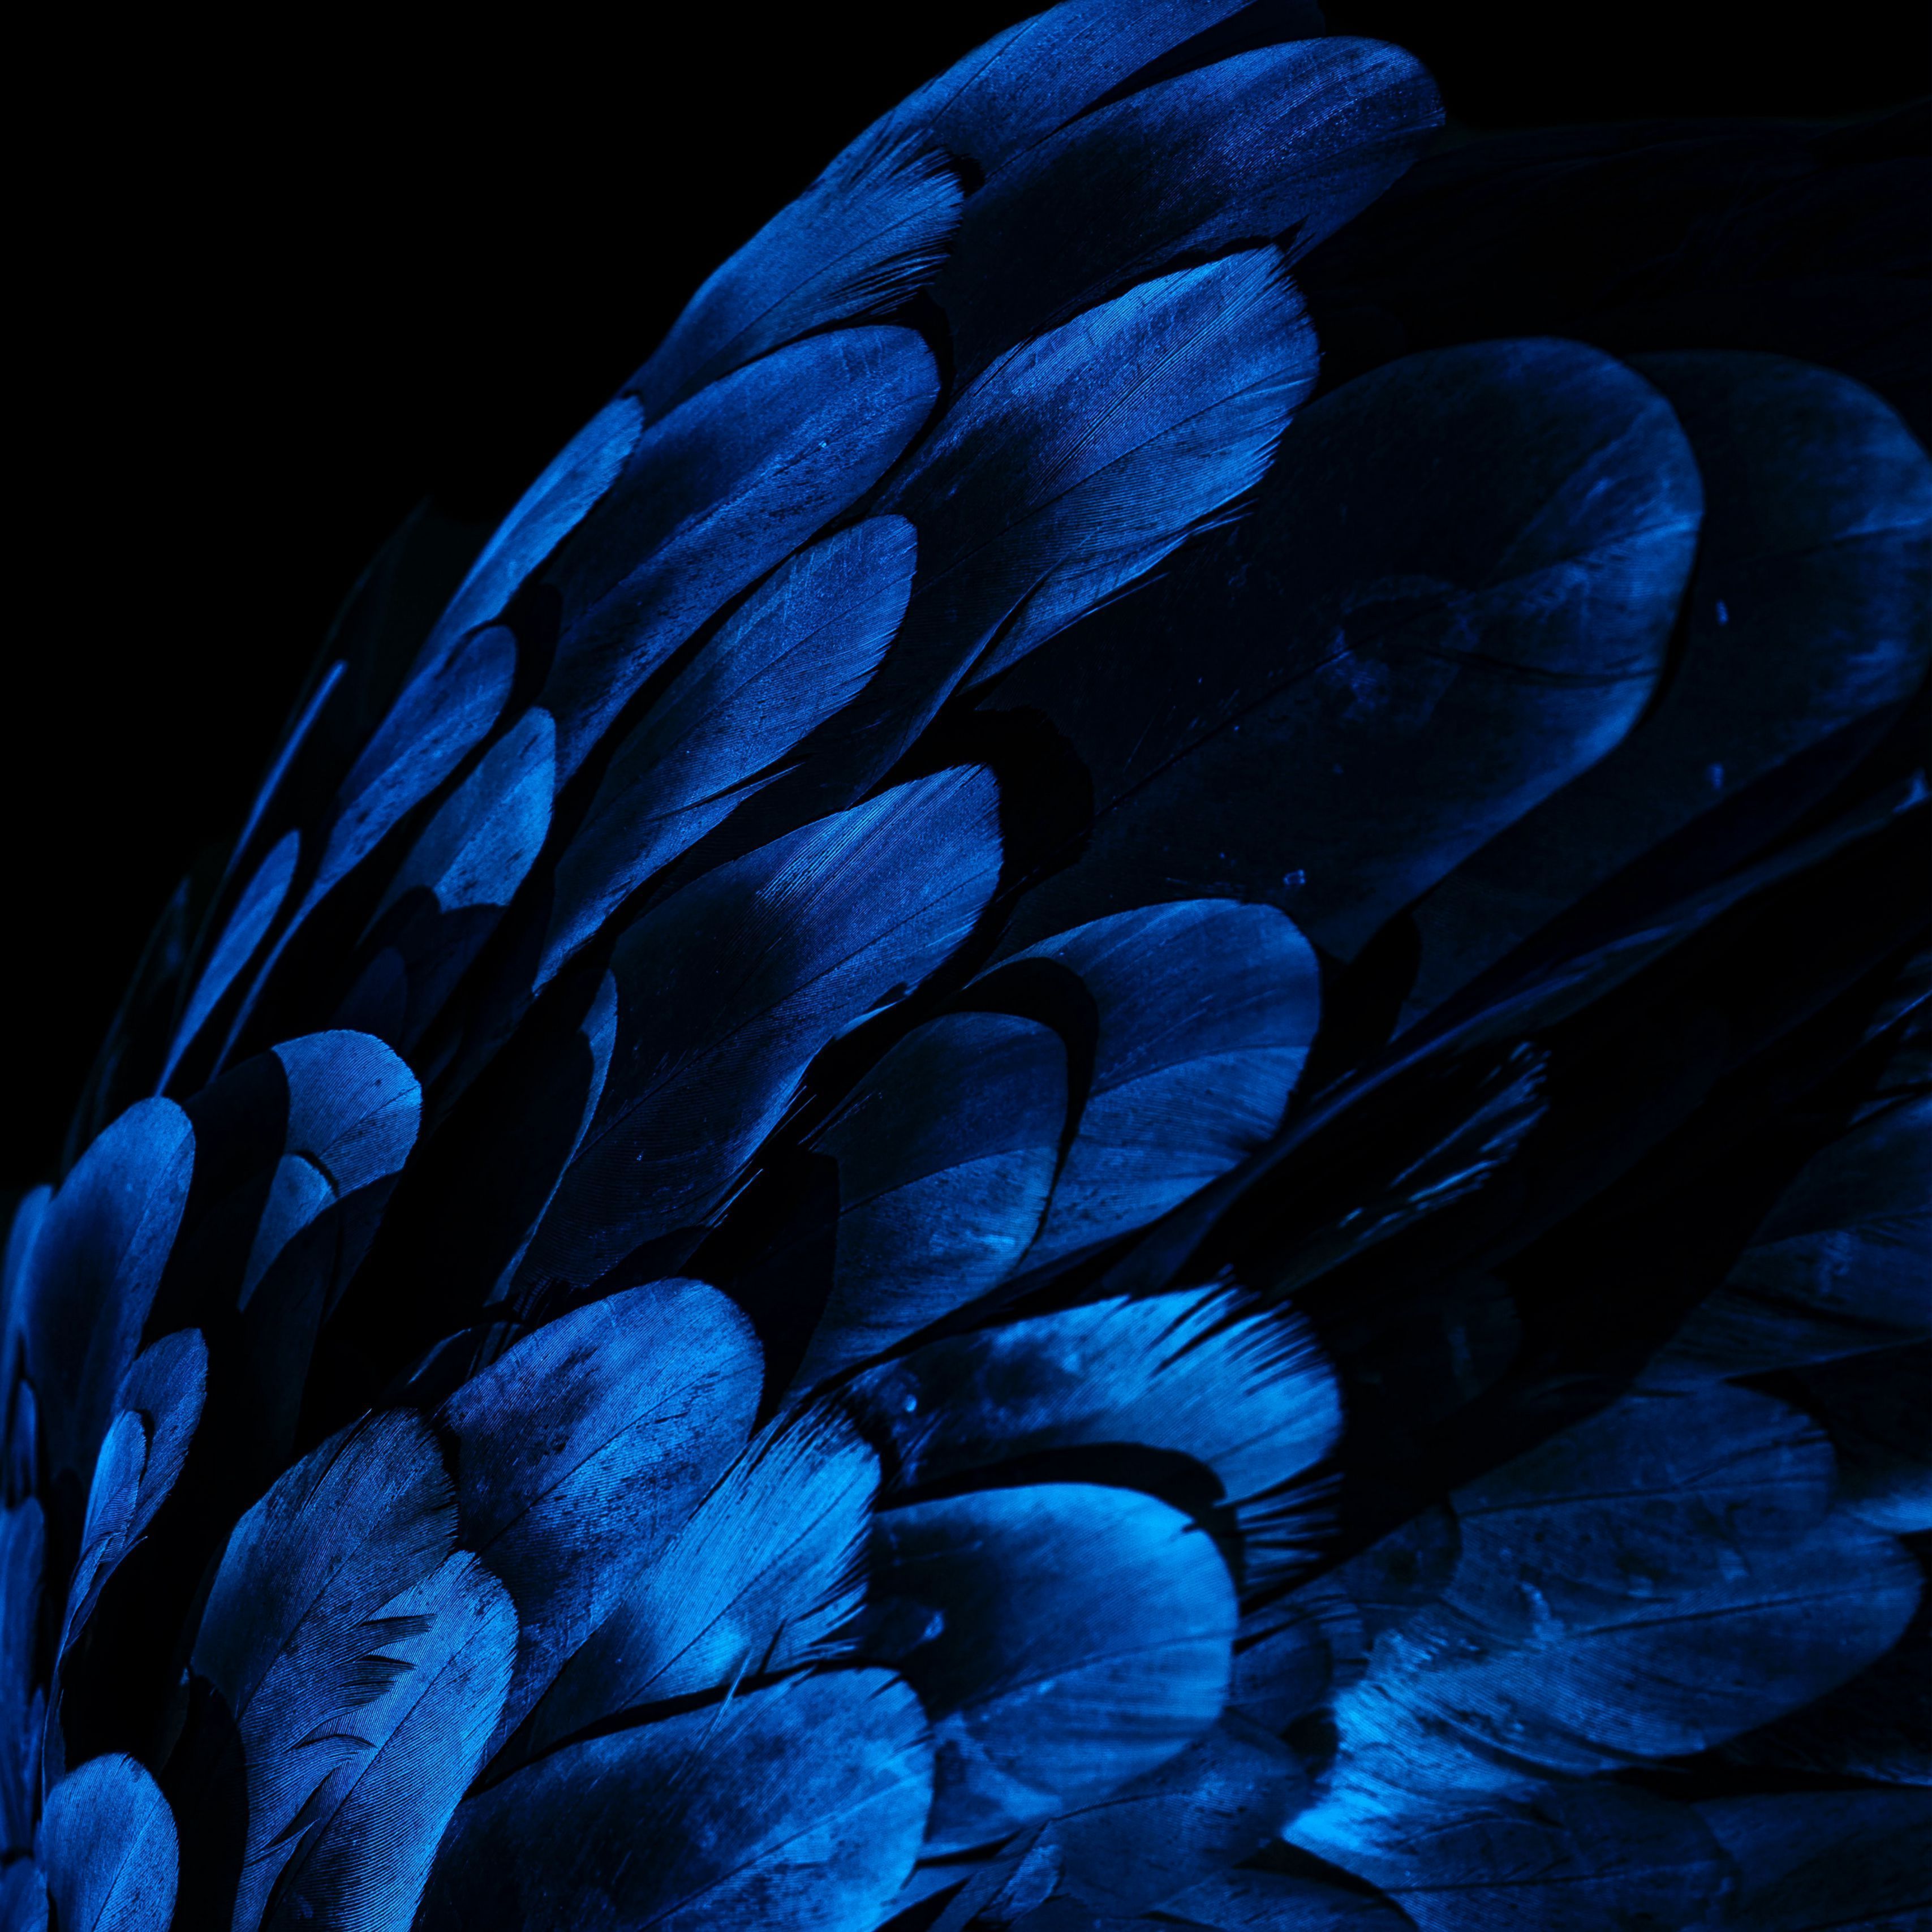 A close-up of a feather, which is blue and black. - Feathers